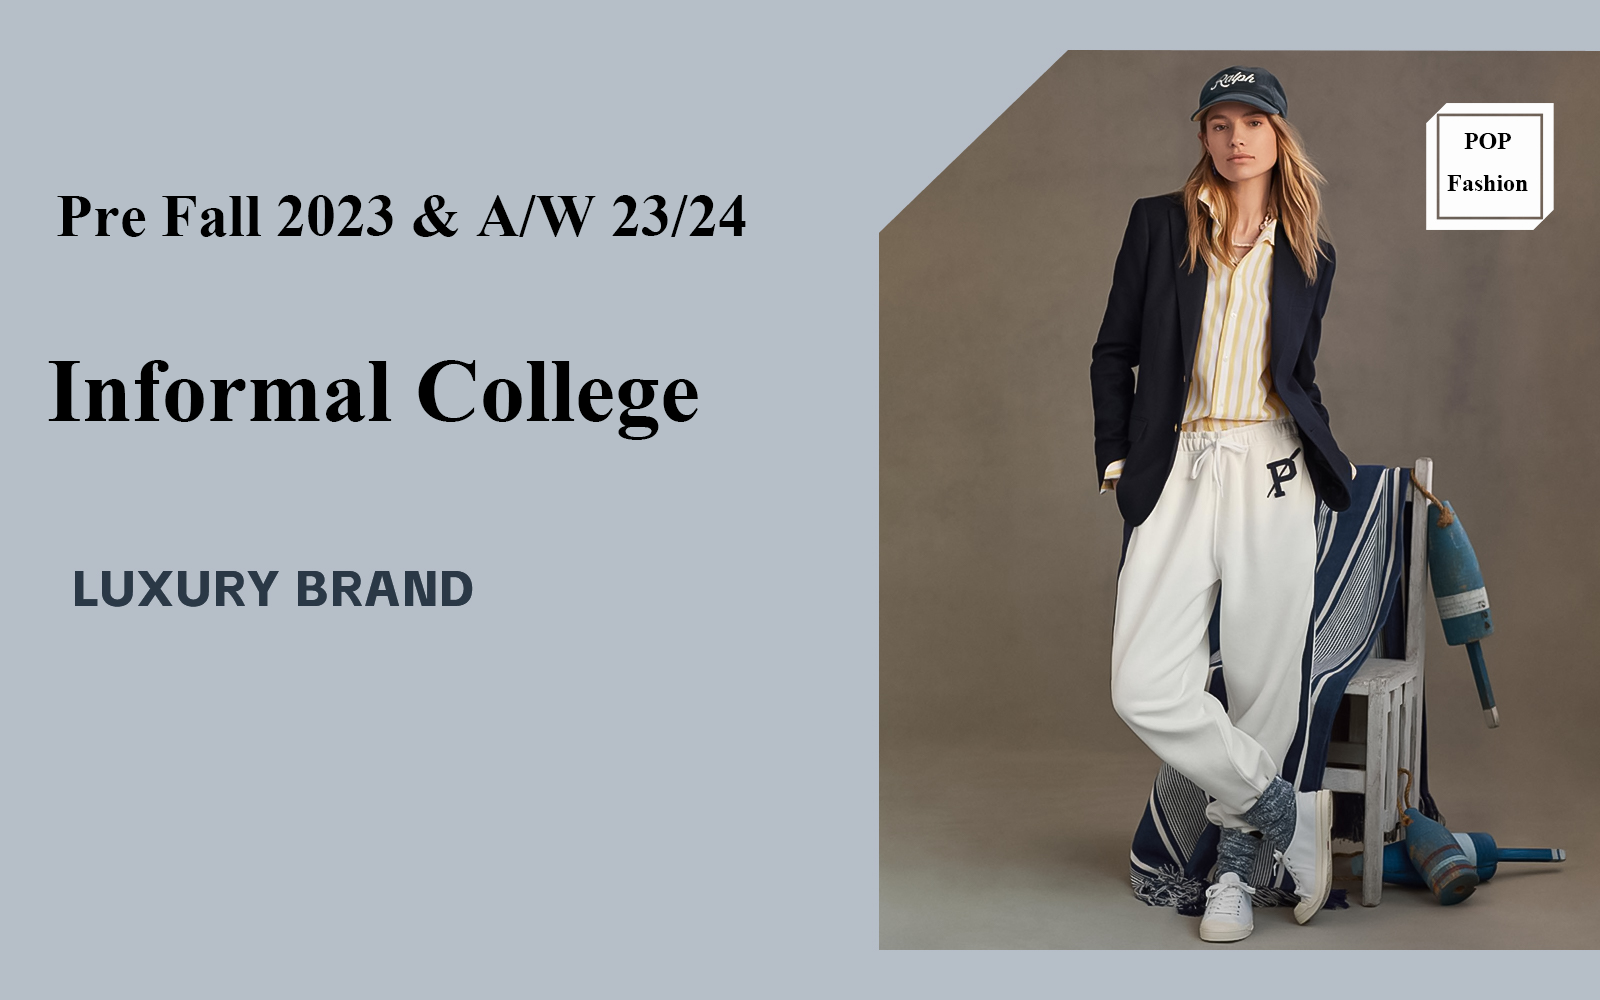 Informal College -- The Comprehensive Analysis of Luxury Brand